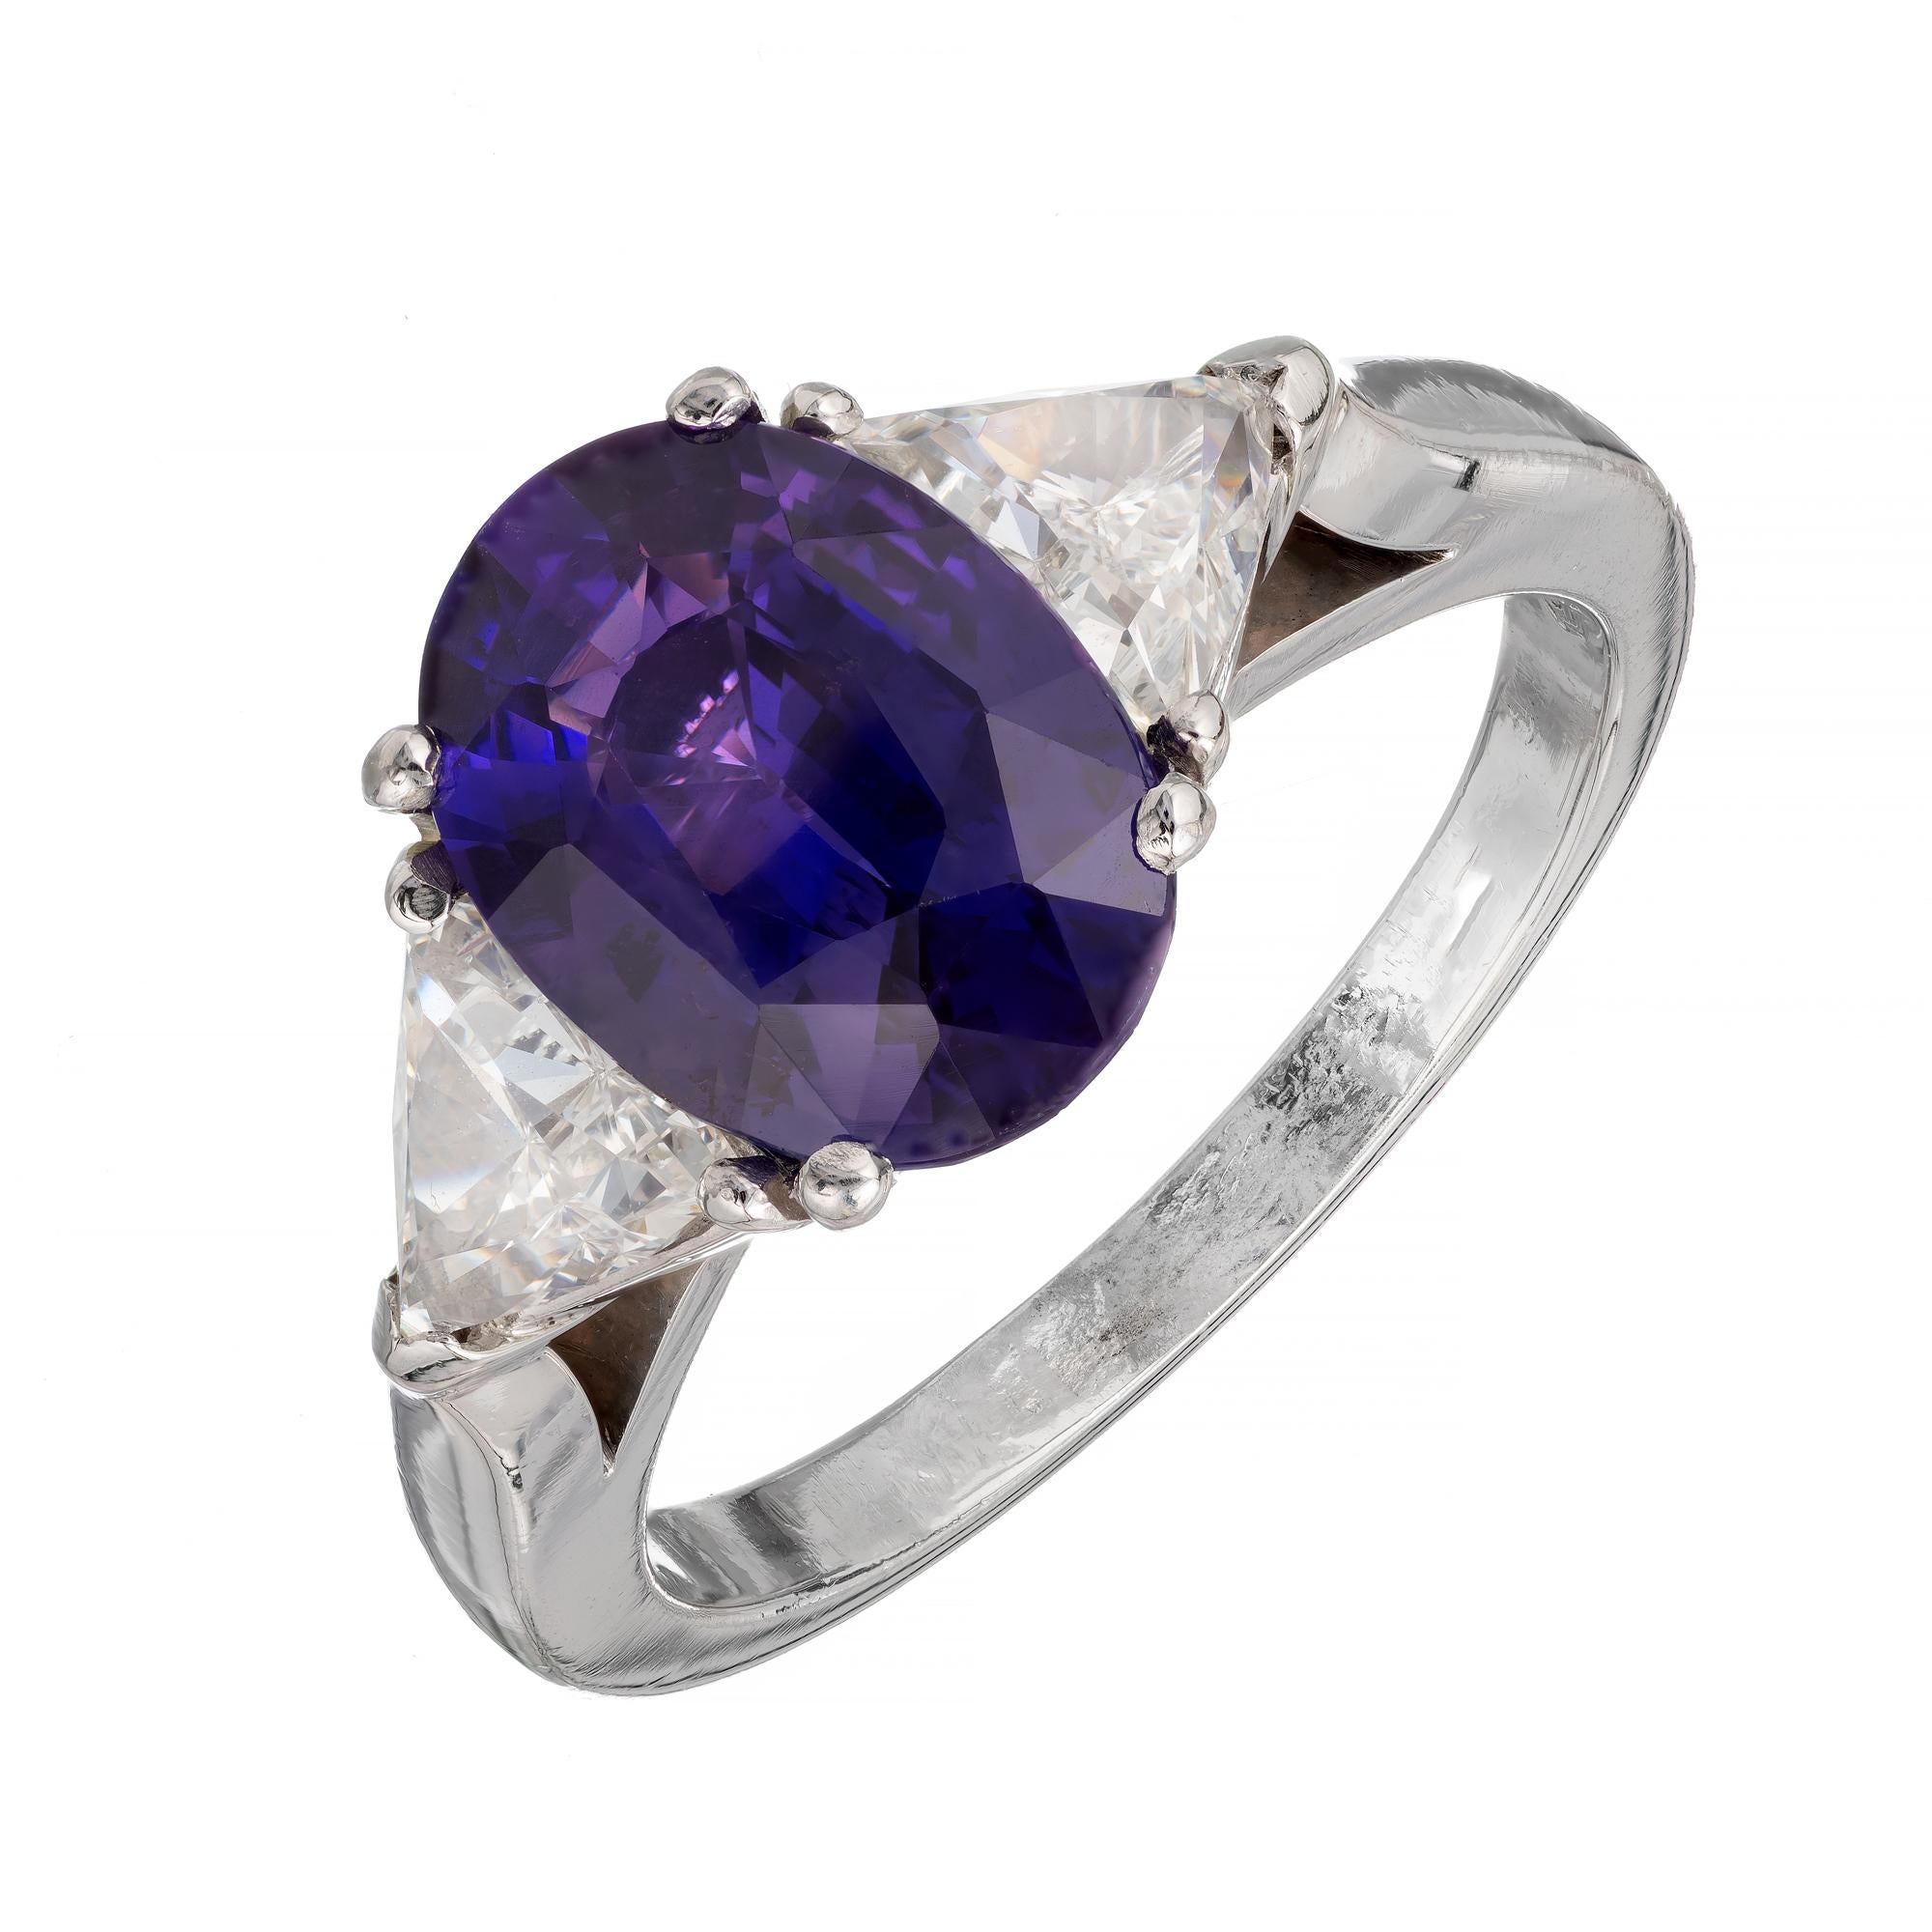 Oval natural untreated color change sapphire and diamond ring. Changes from blush violet to purple depending on light. GIA certified natural no heat, oval center sapphire with two accent trilliant cut side diamonds in a three-stone setting made in